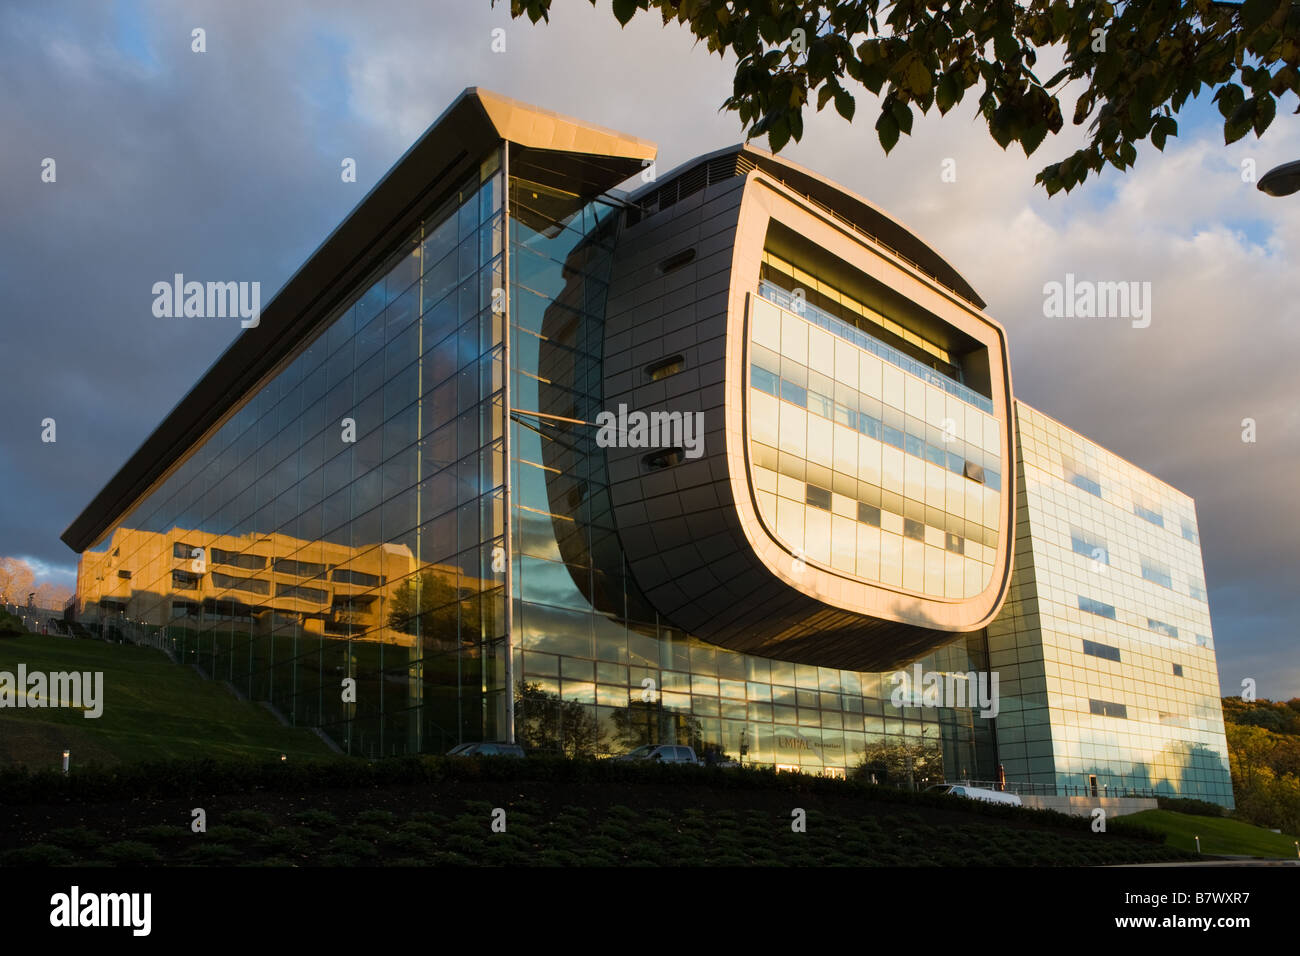 Experimentelle Medien und Performing Arts Center aka EMPAC am Rensselaer Polytechnic Institute RPI in Troy, New York State Stockfoto